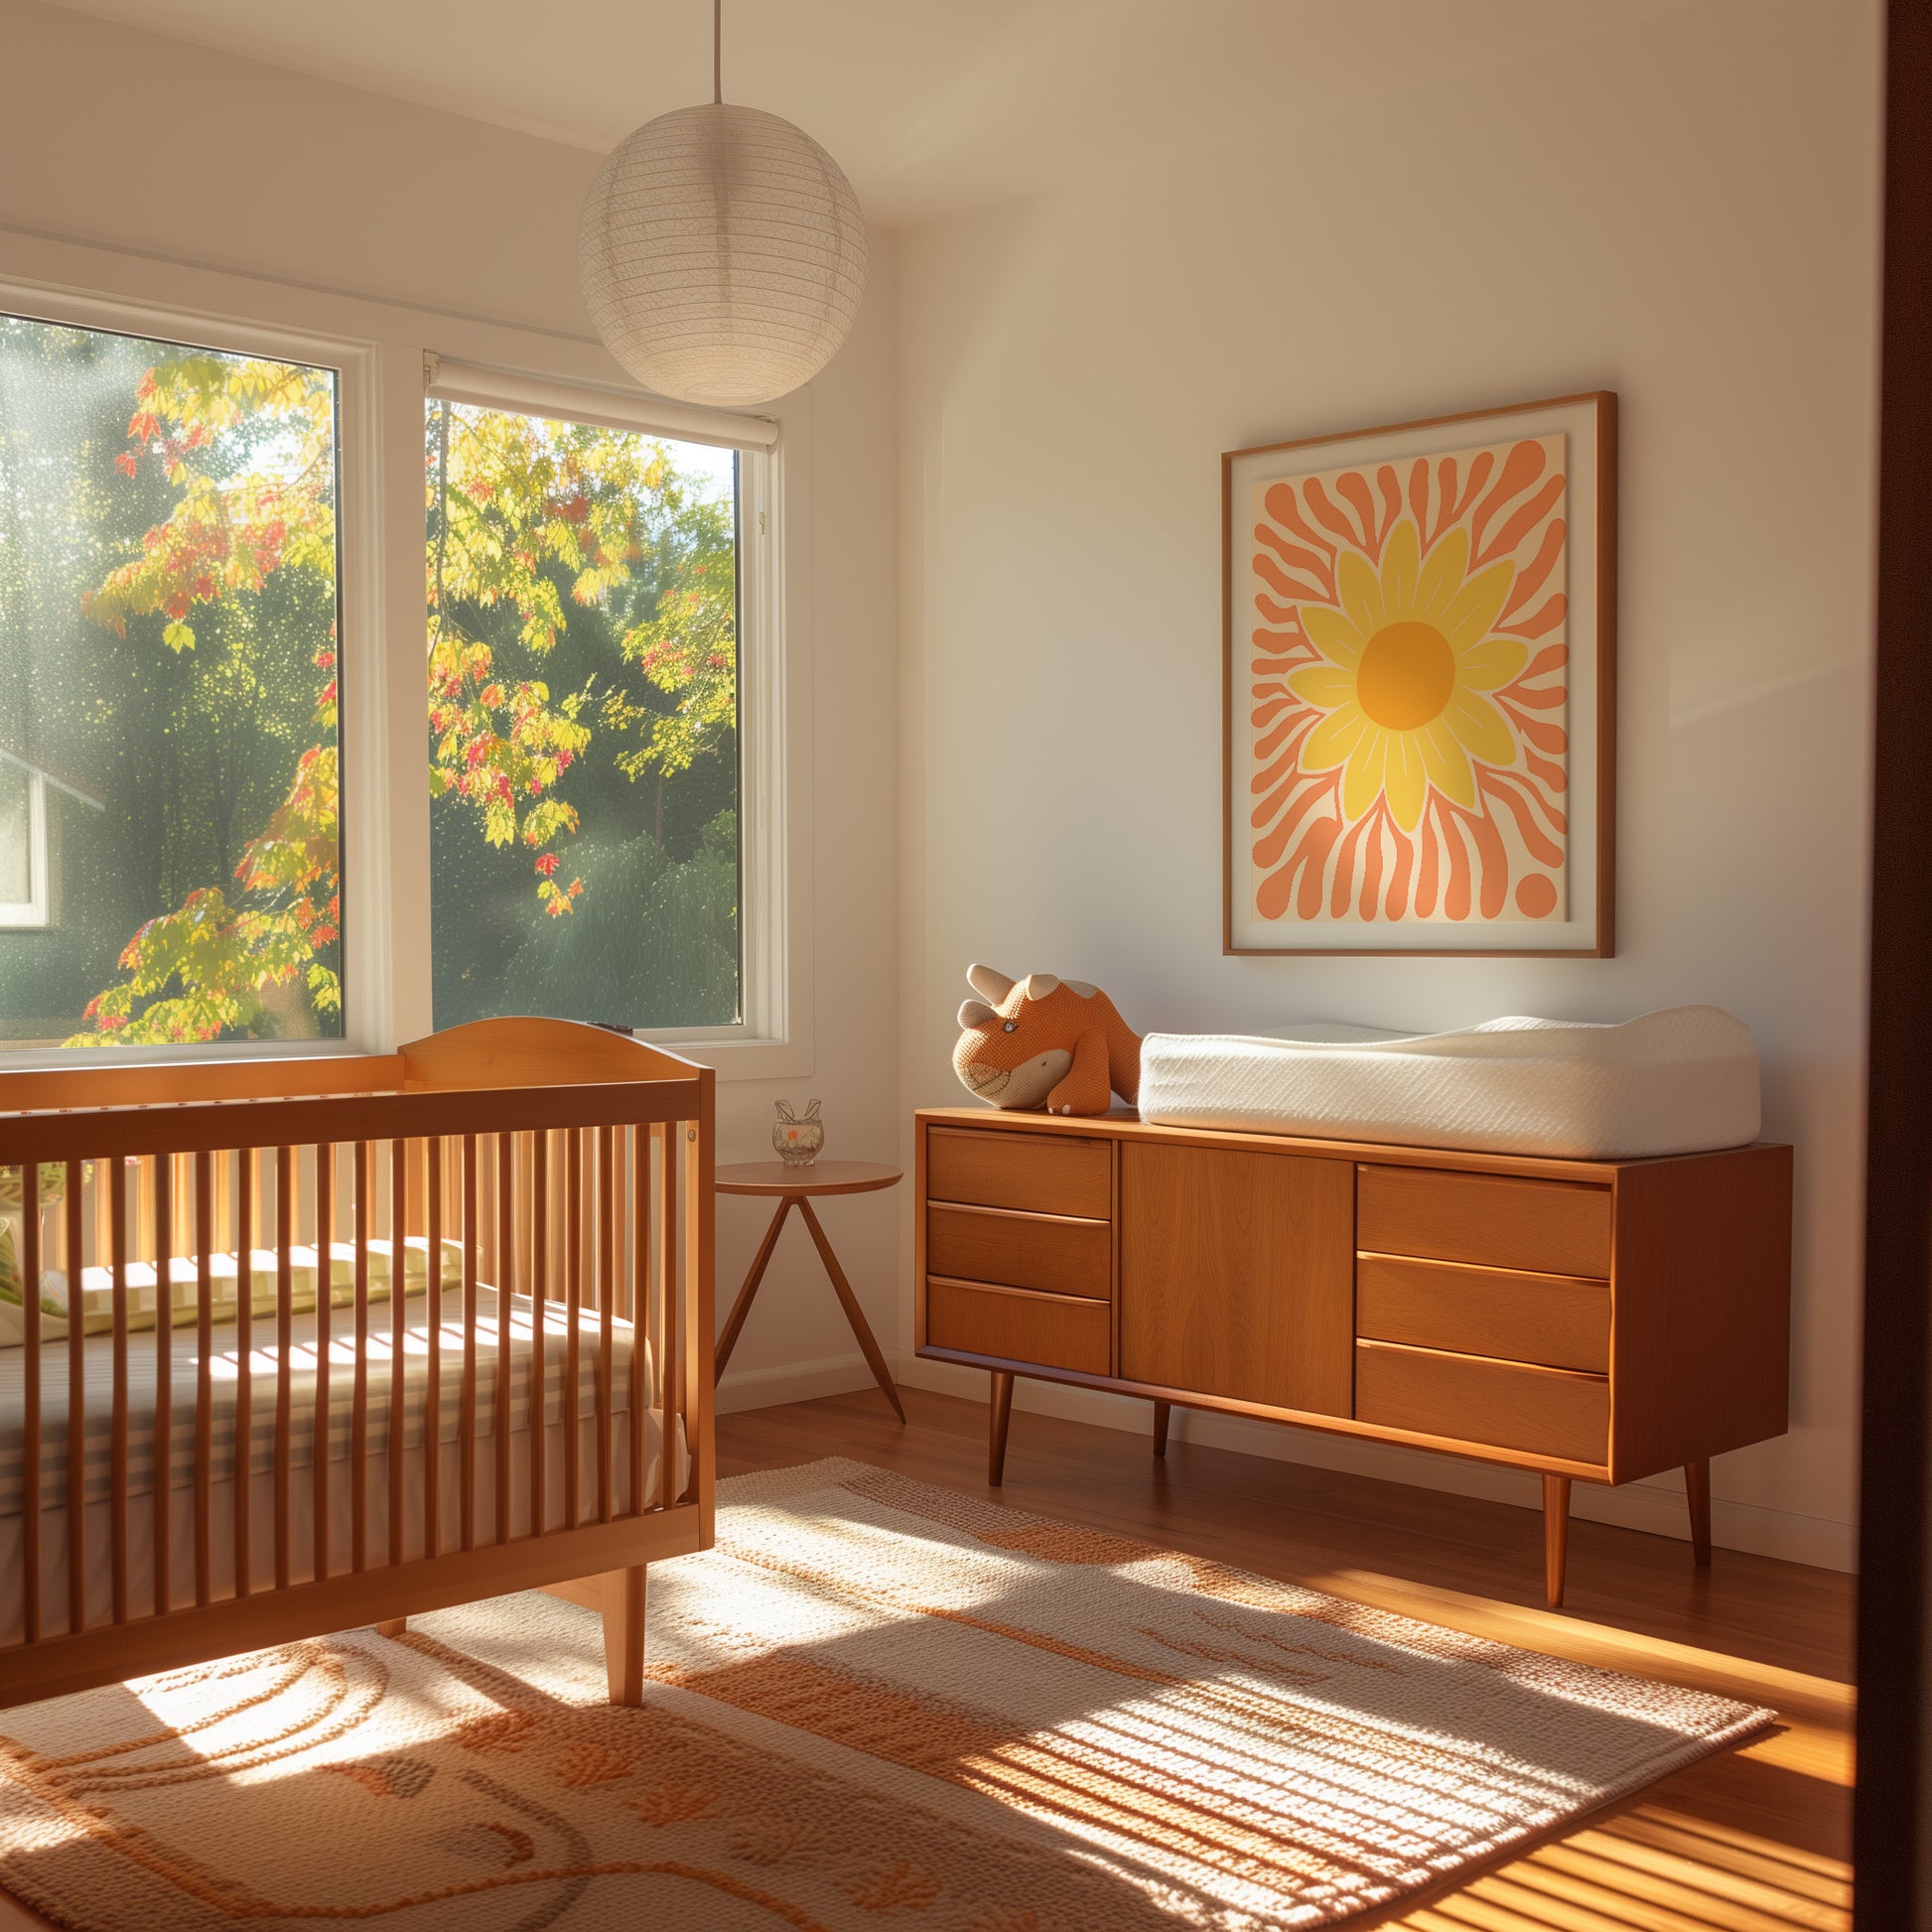 A sunny bedroom with a wooden crib, dresser, and a colorful painting on the wall.